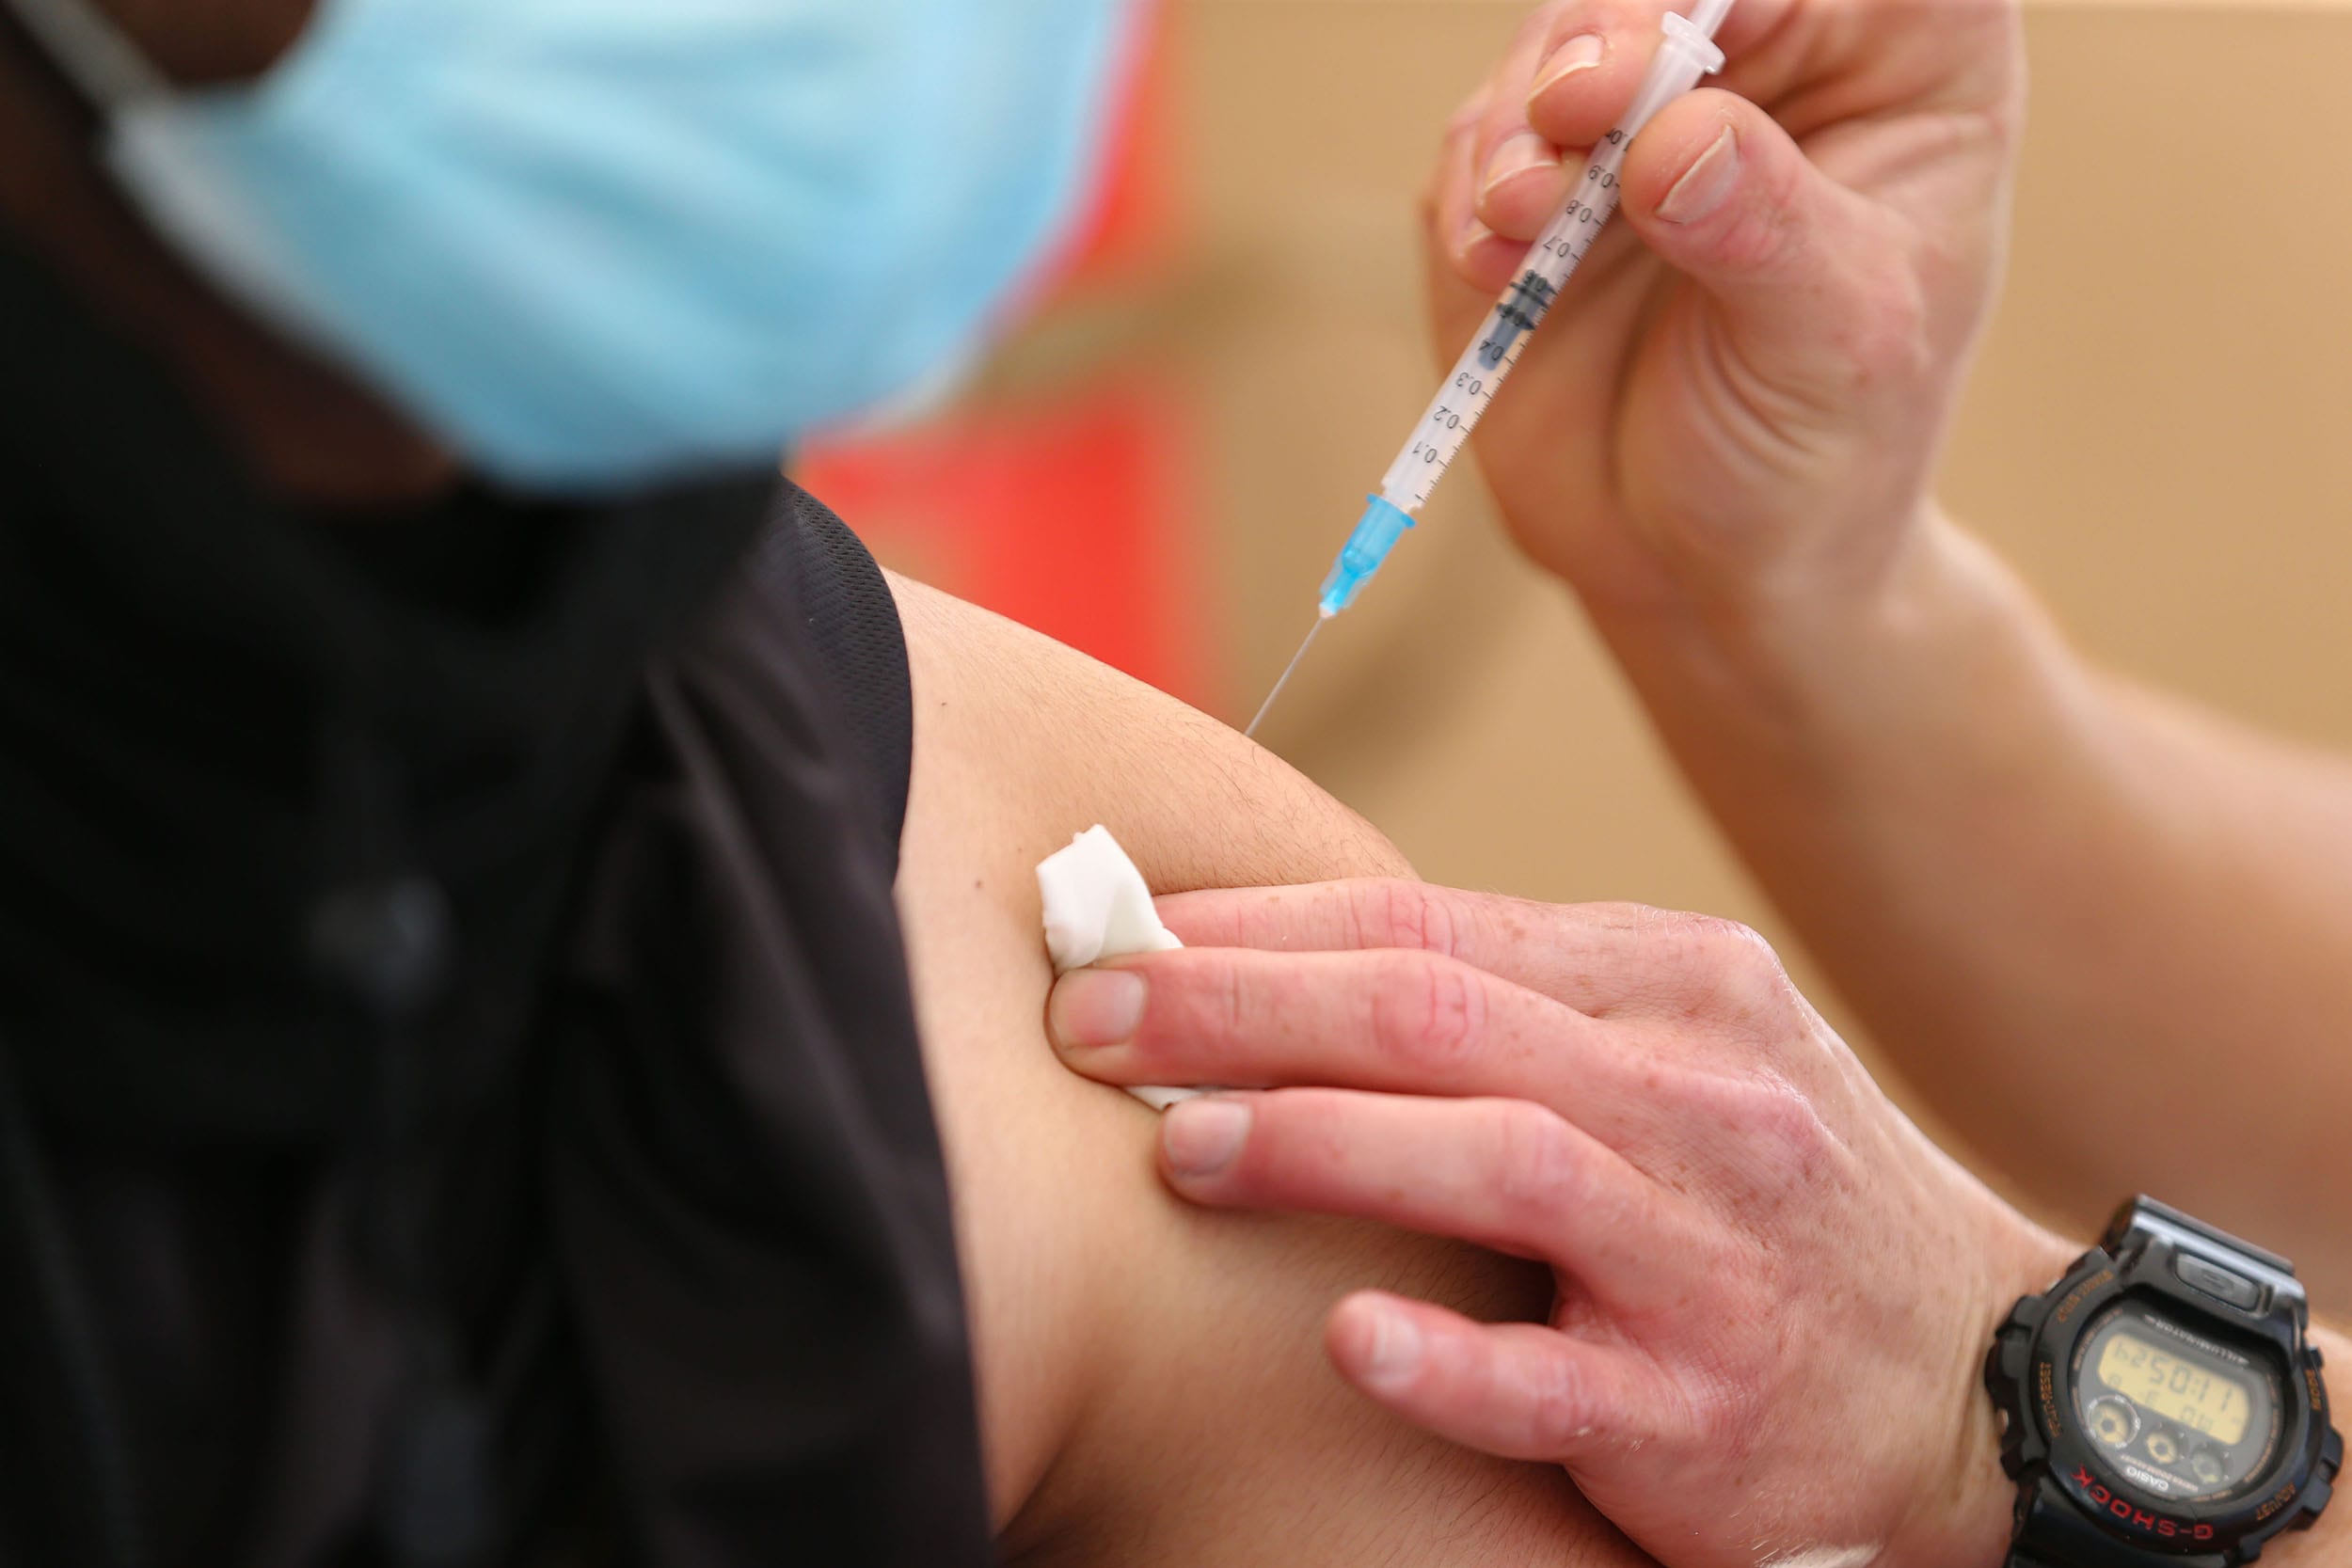 Turkey has administered over 92.4 million doses of COVID-19 vaccines